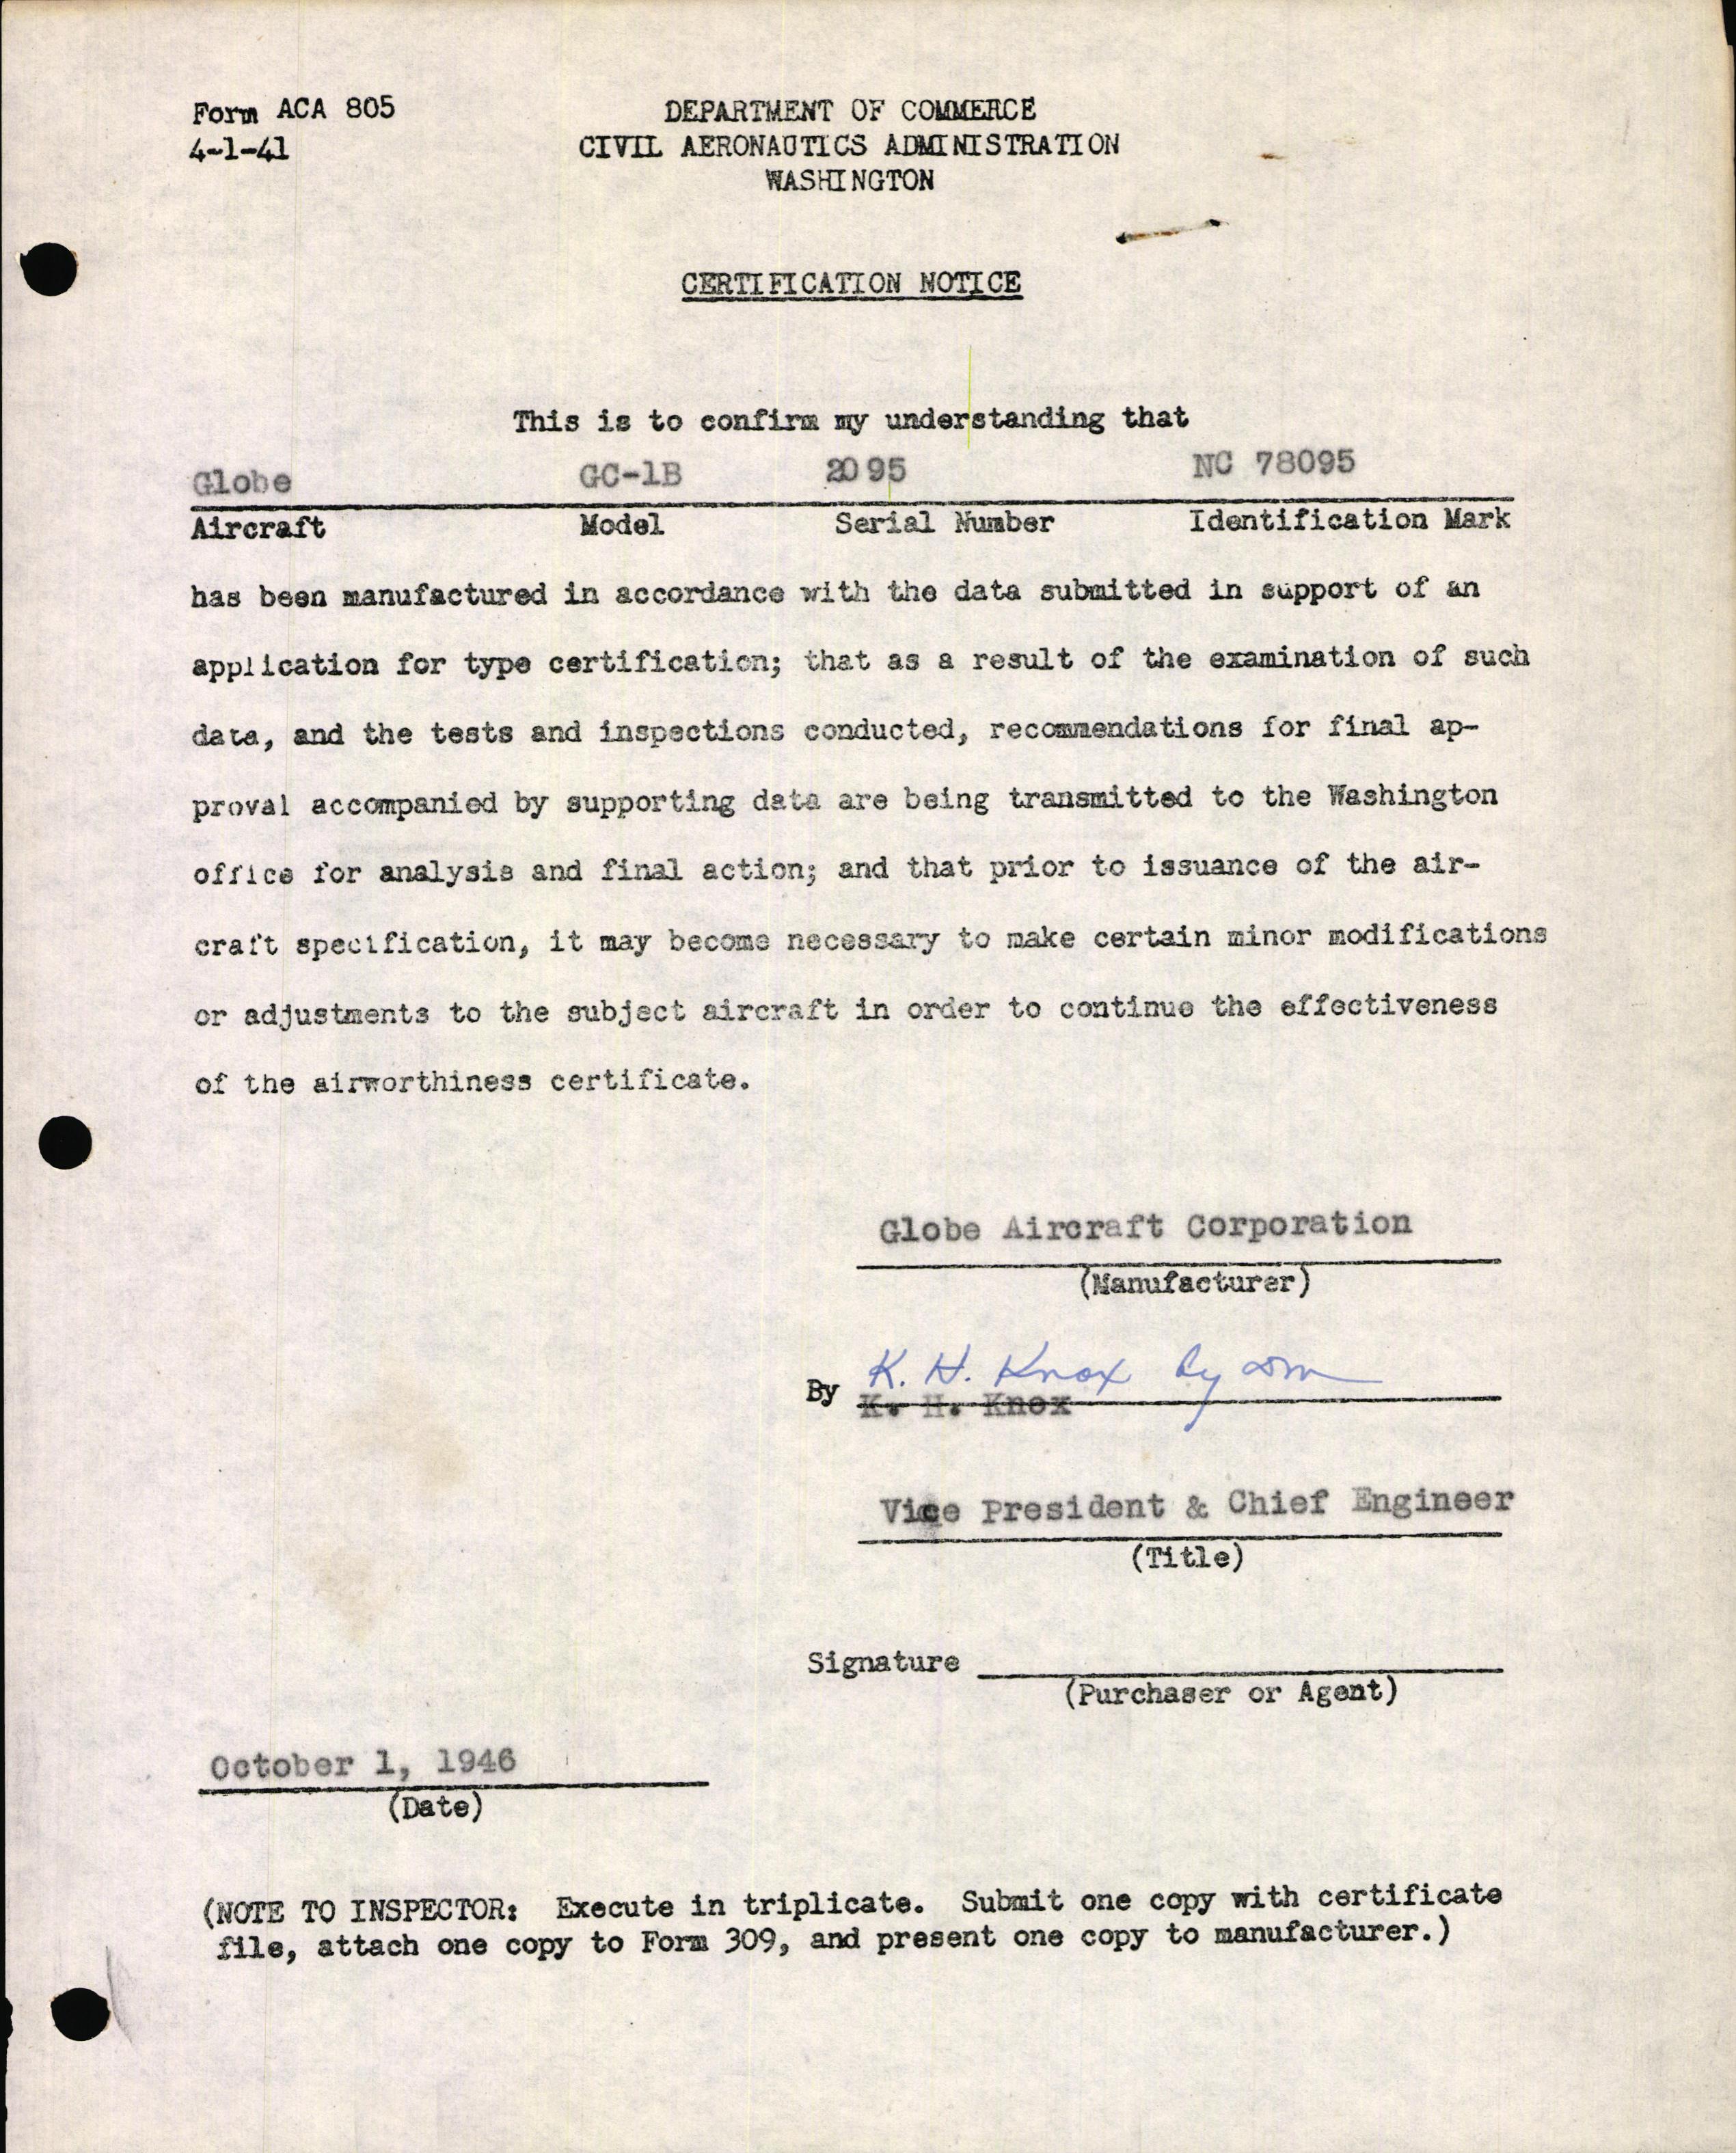 Sample page 1 from AirCorps Library document: Technical Information for Serial Number 2095